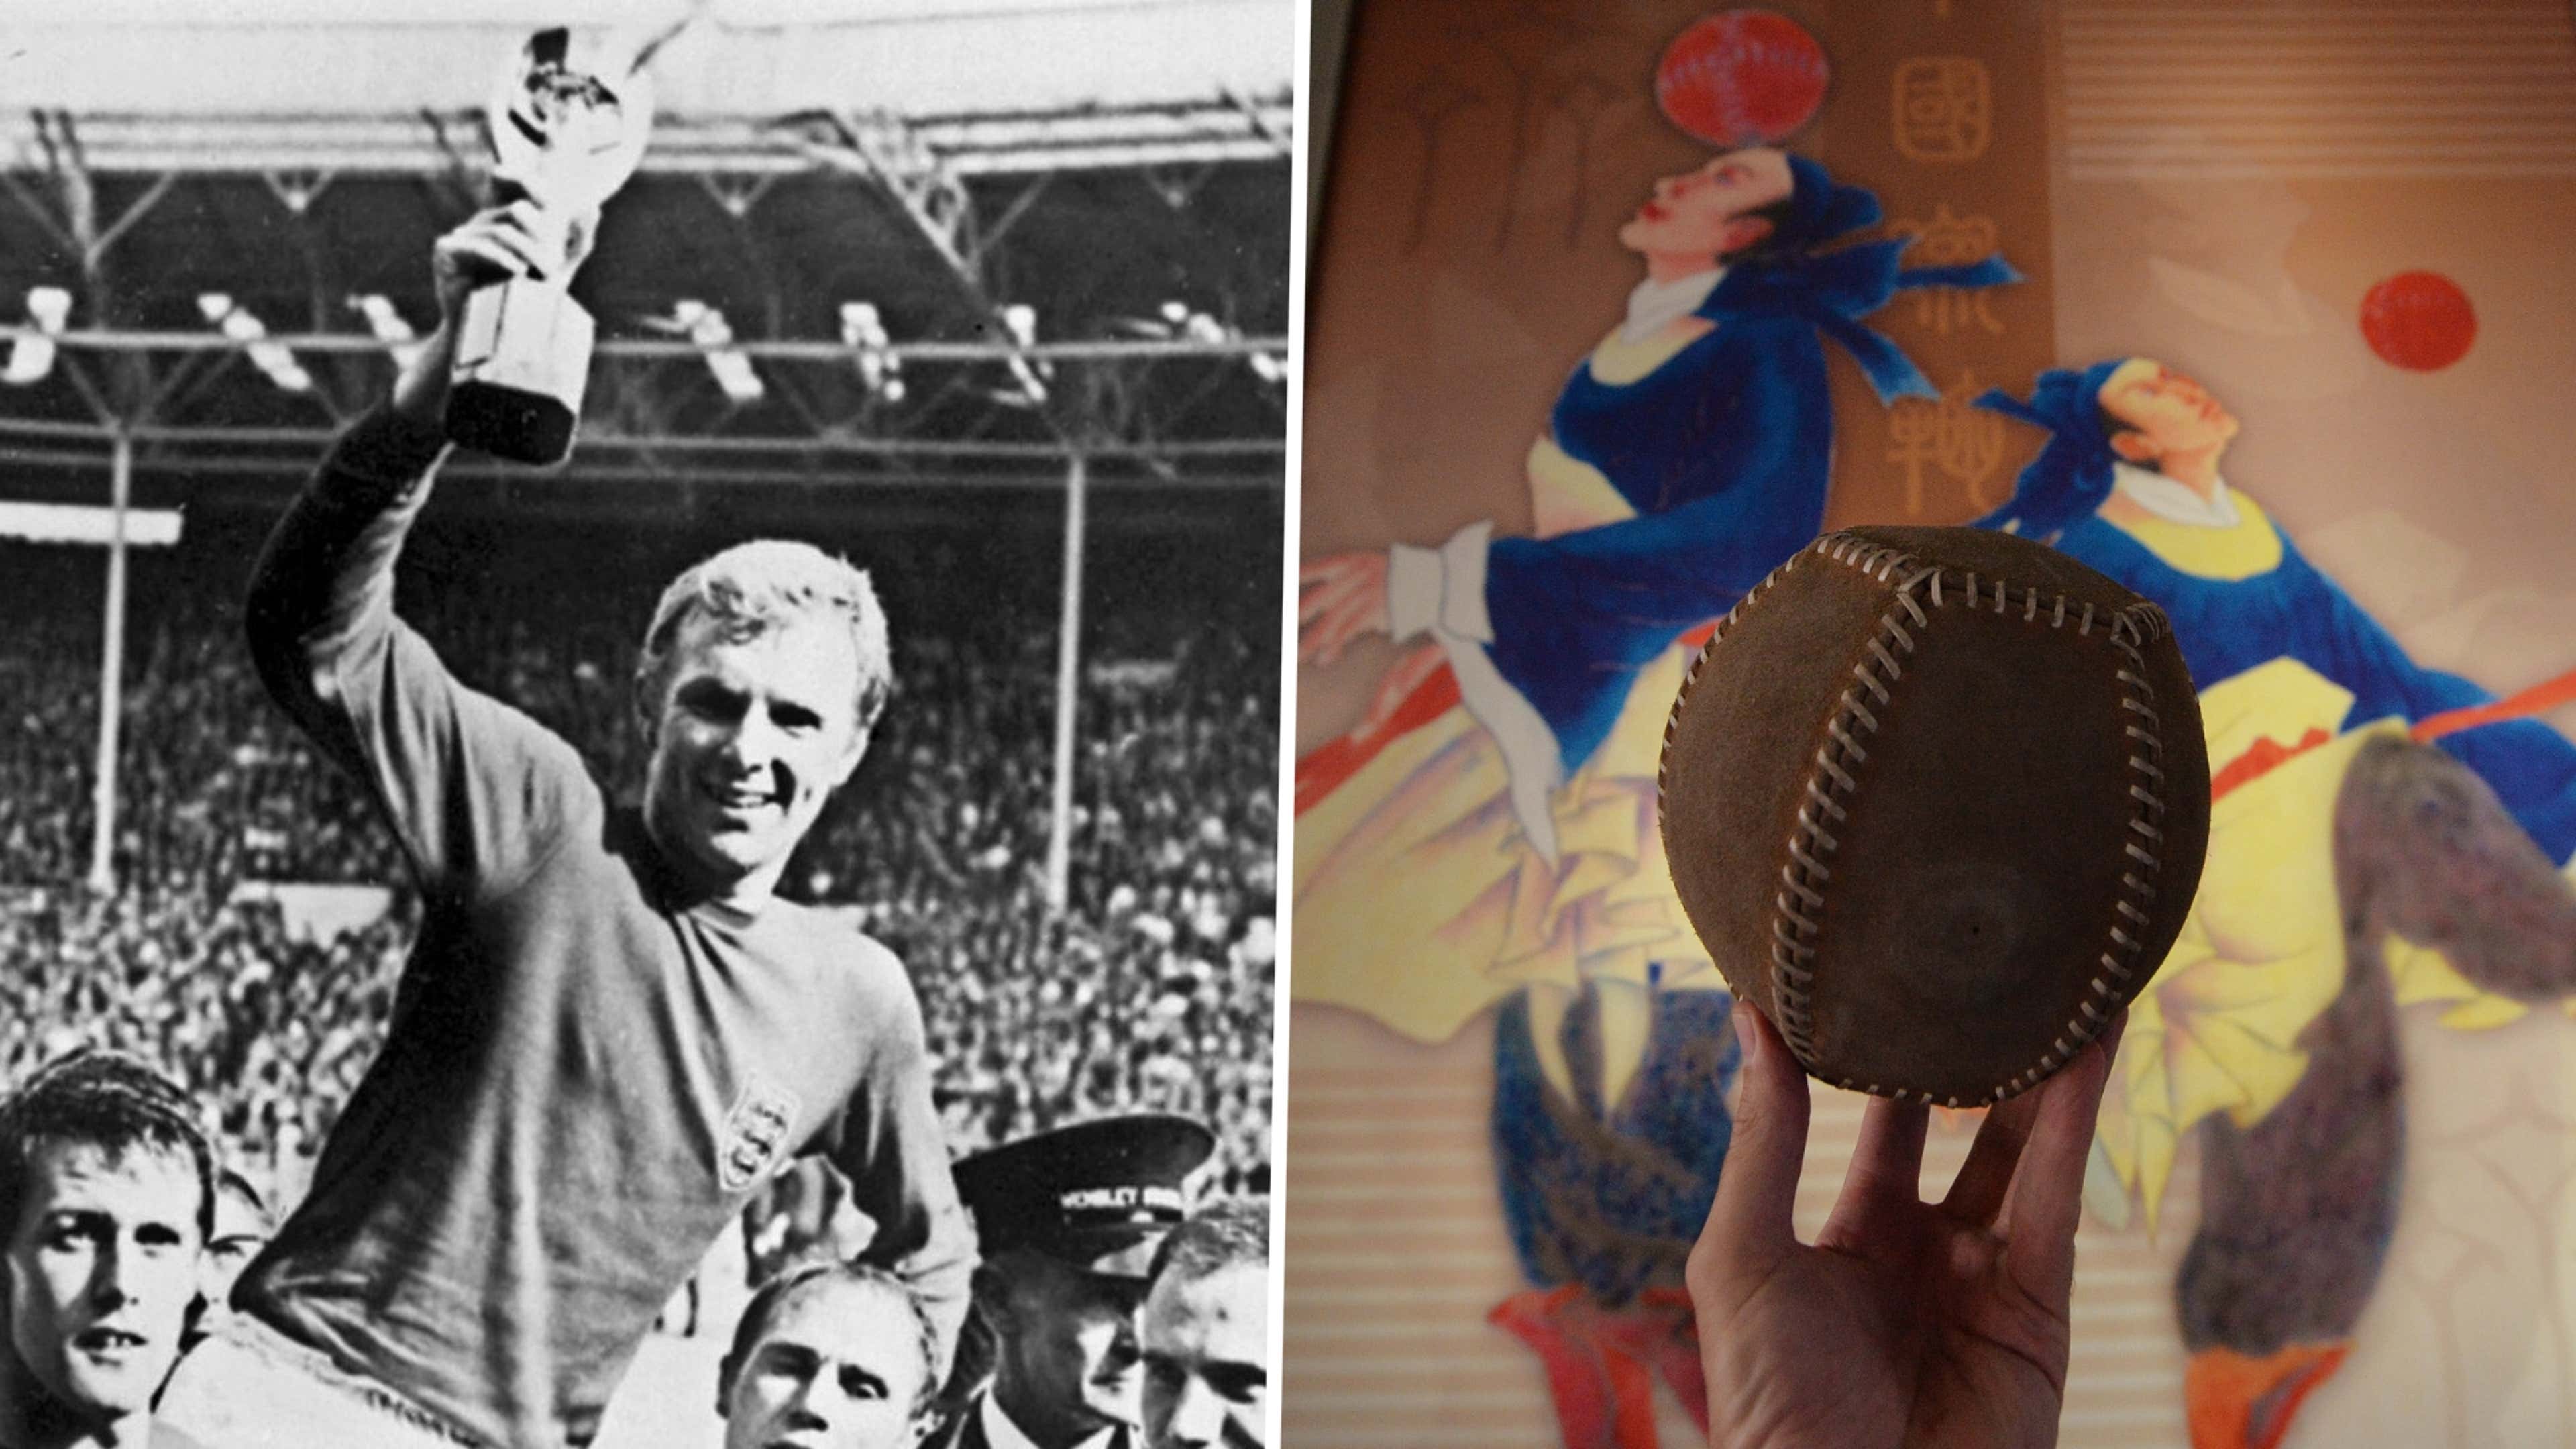 Here's who invented soccer, the world's most popular sport